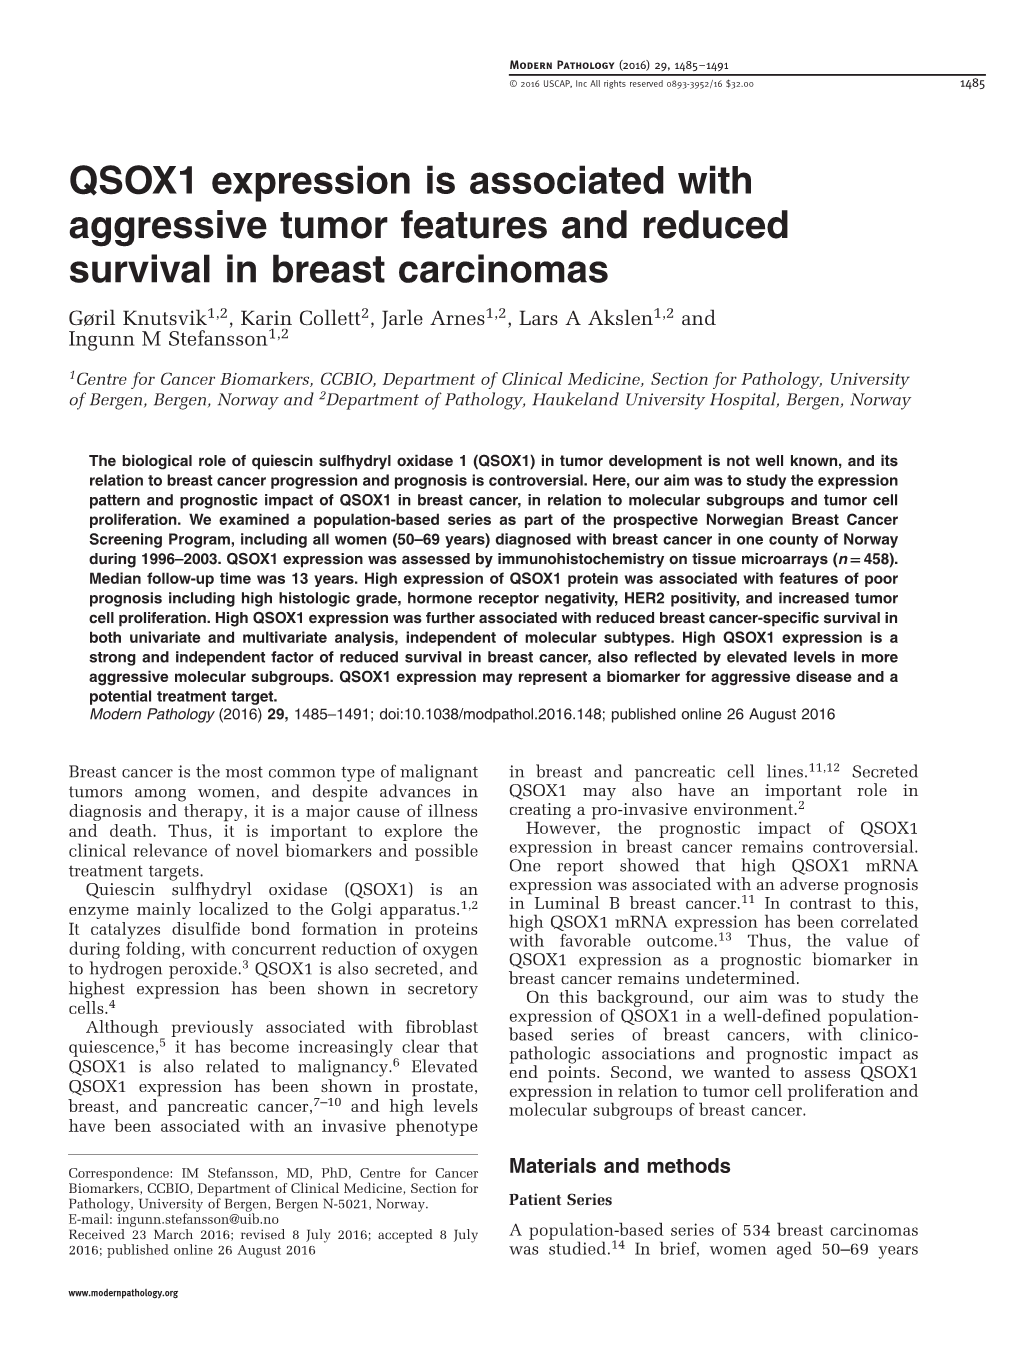 QSOX1 Expression Is Associated with Aggressive Tumor Features and Reduced Survival in Breast Carcinomas